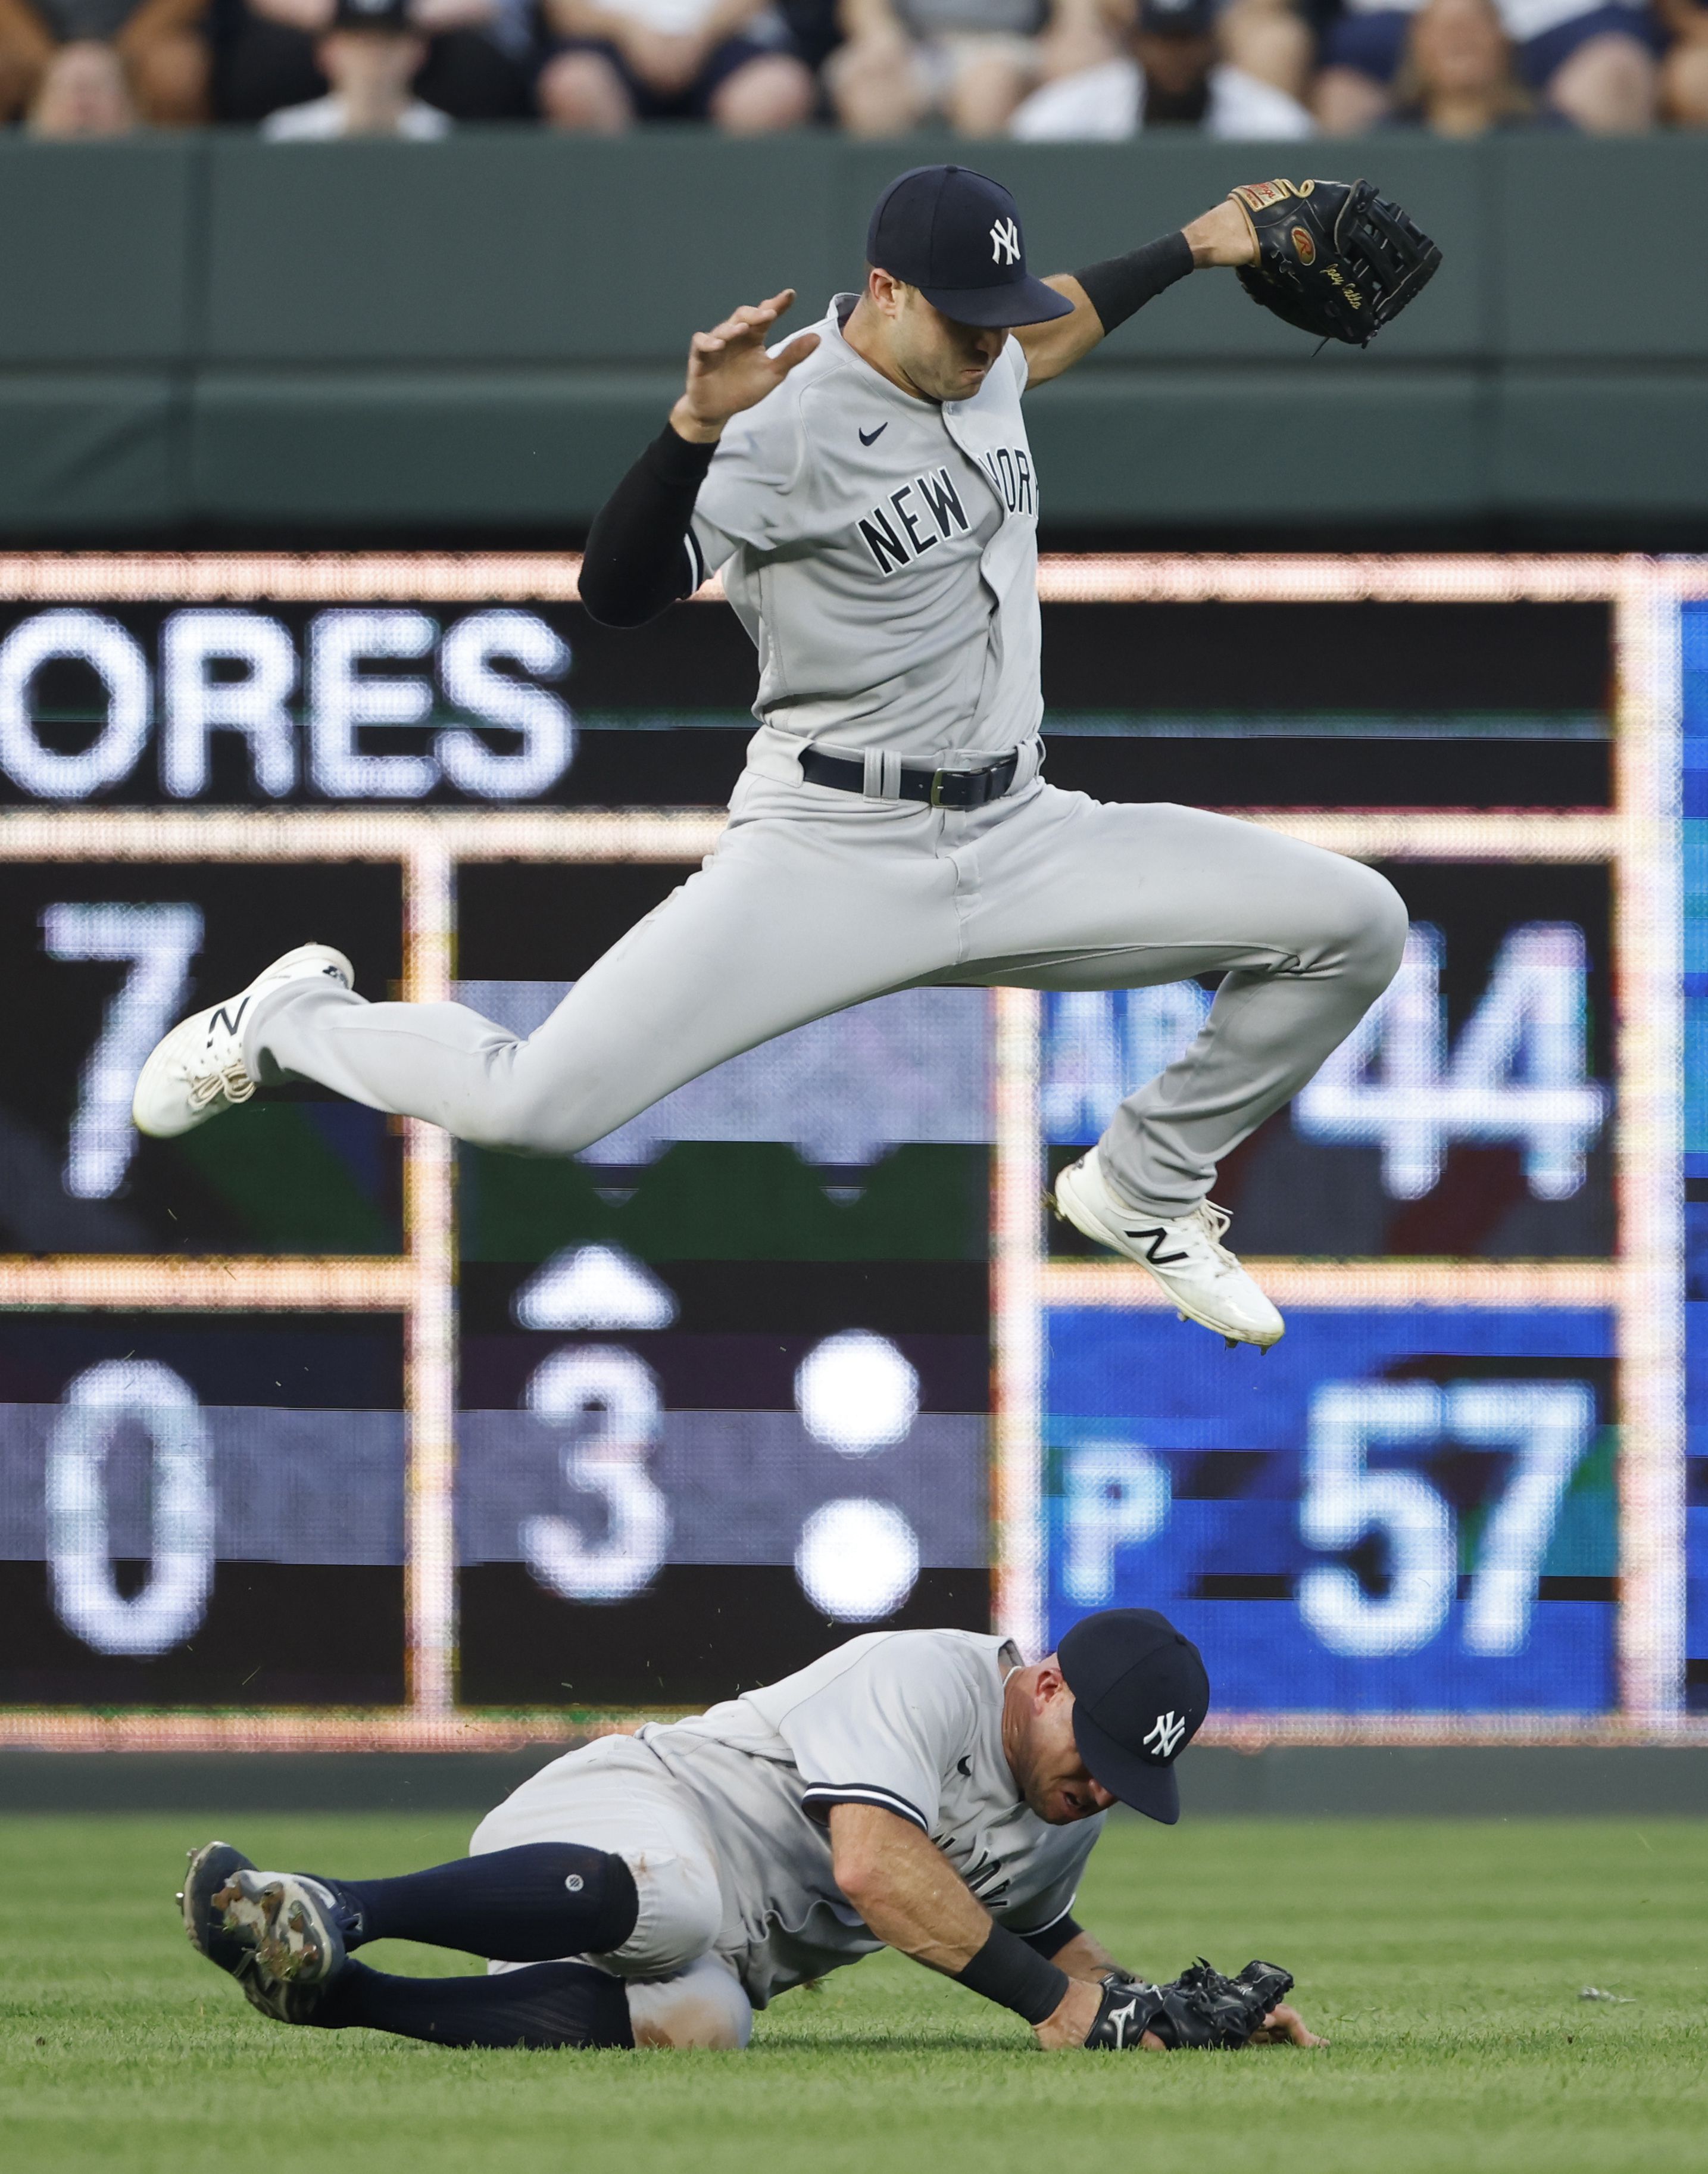 Luke Voit homer leads charge as NY Yankees score late to beat A's